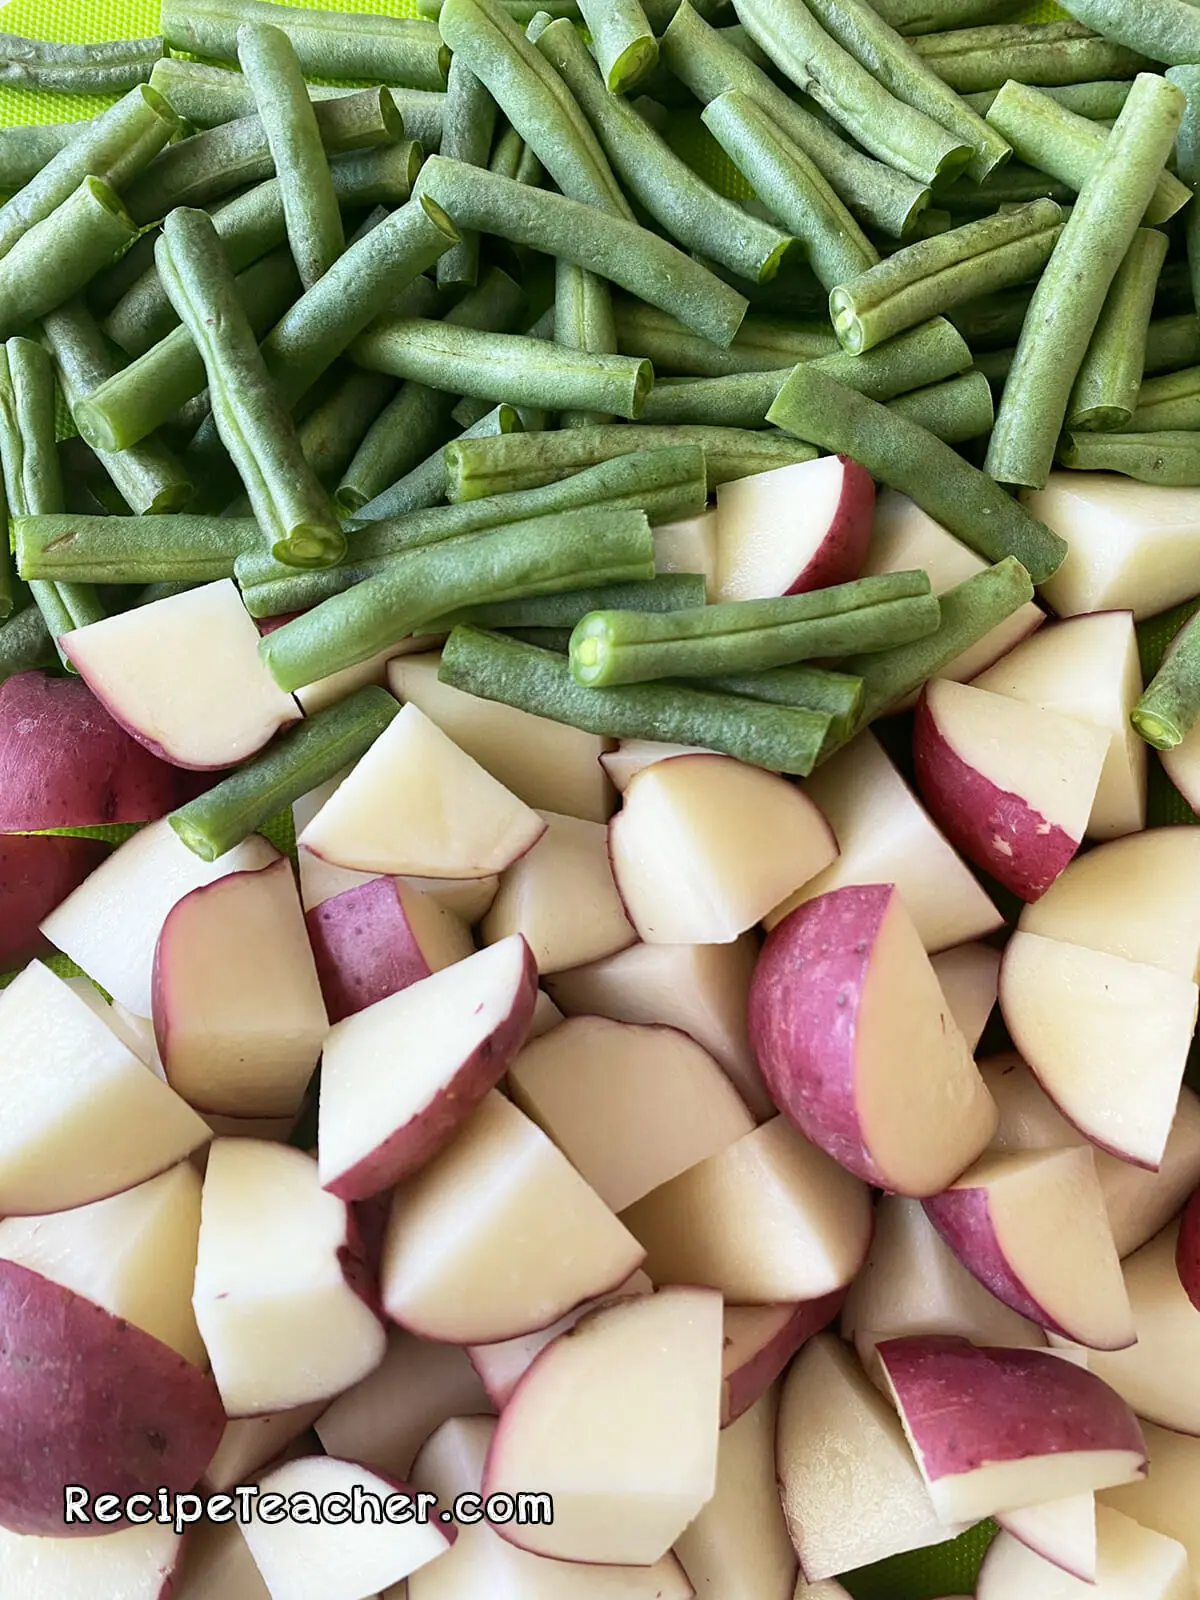 Recipe for Creamy Garlic Parmesan Red Potatoes and Green Beans 